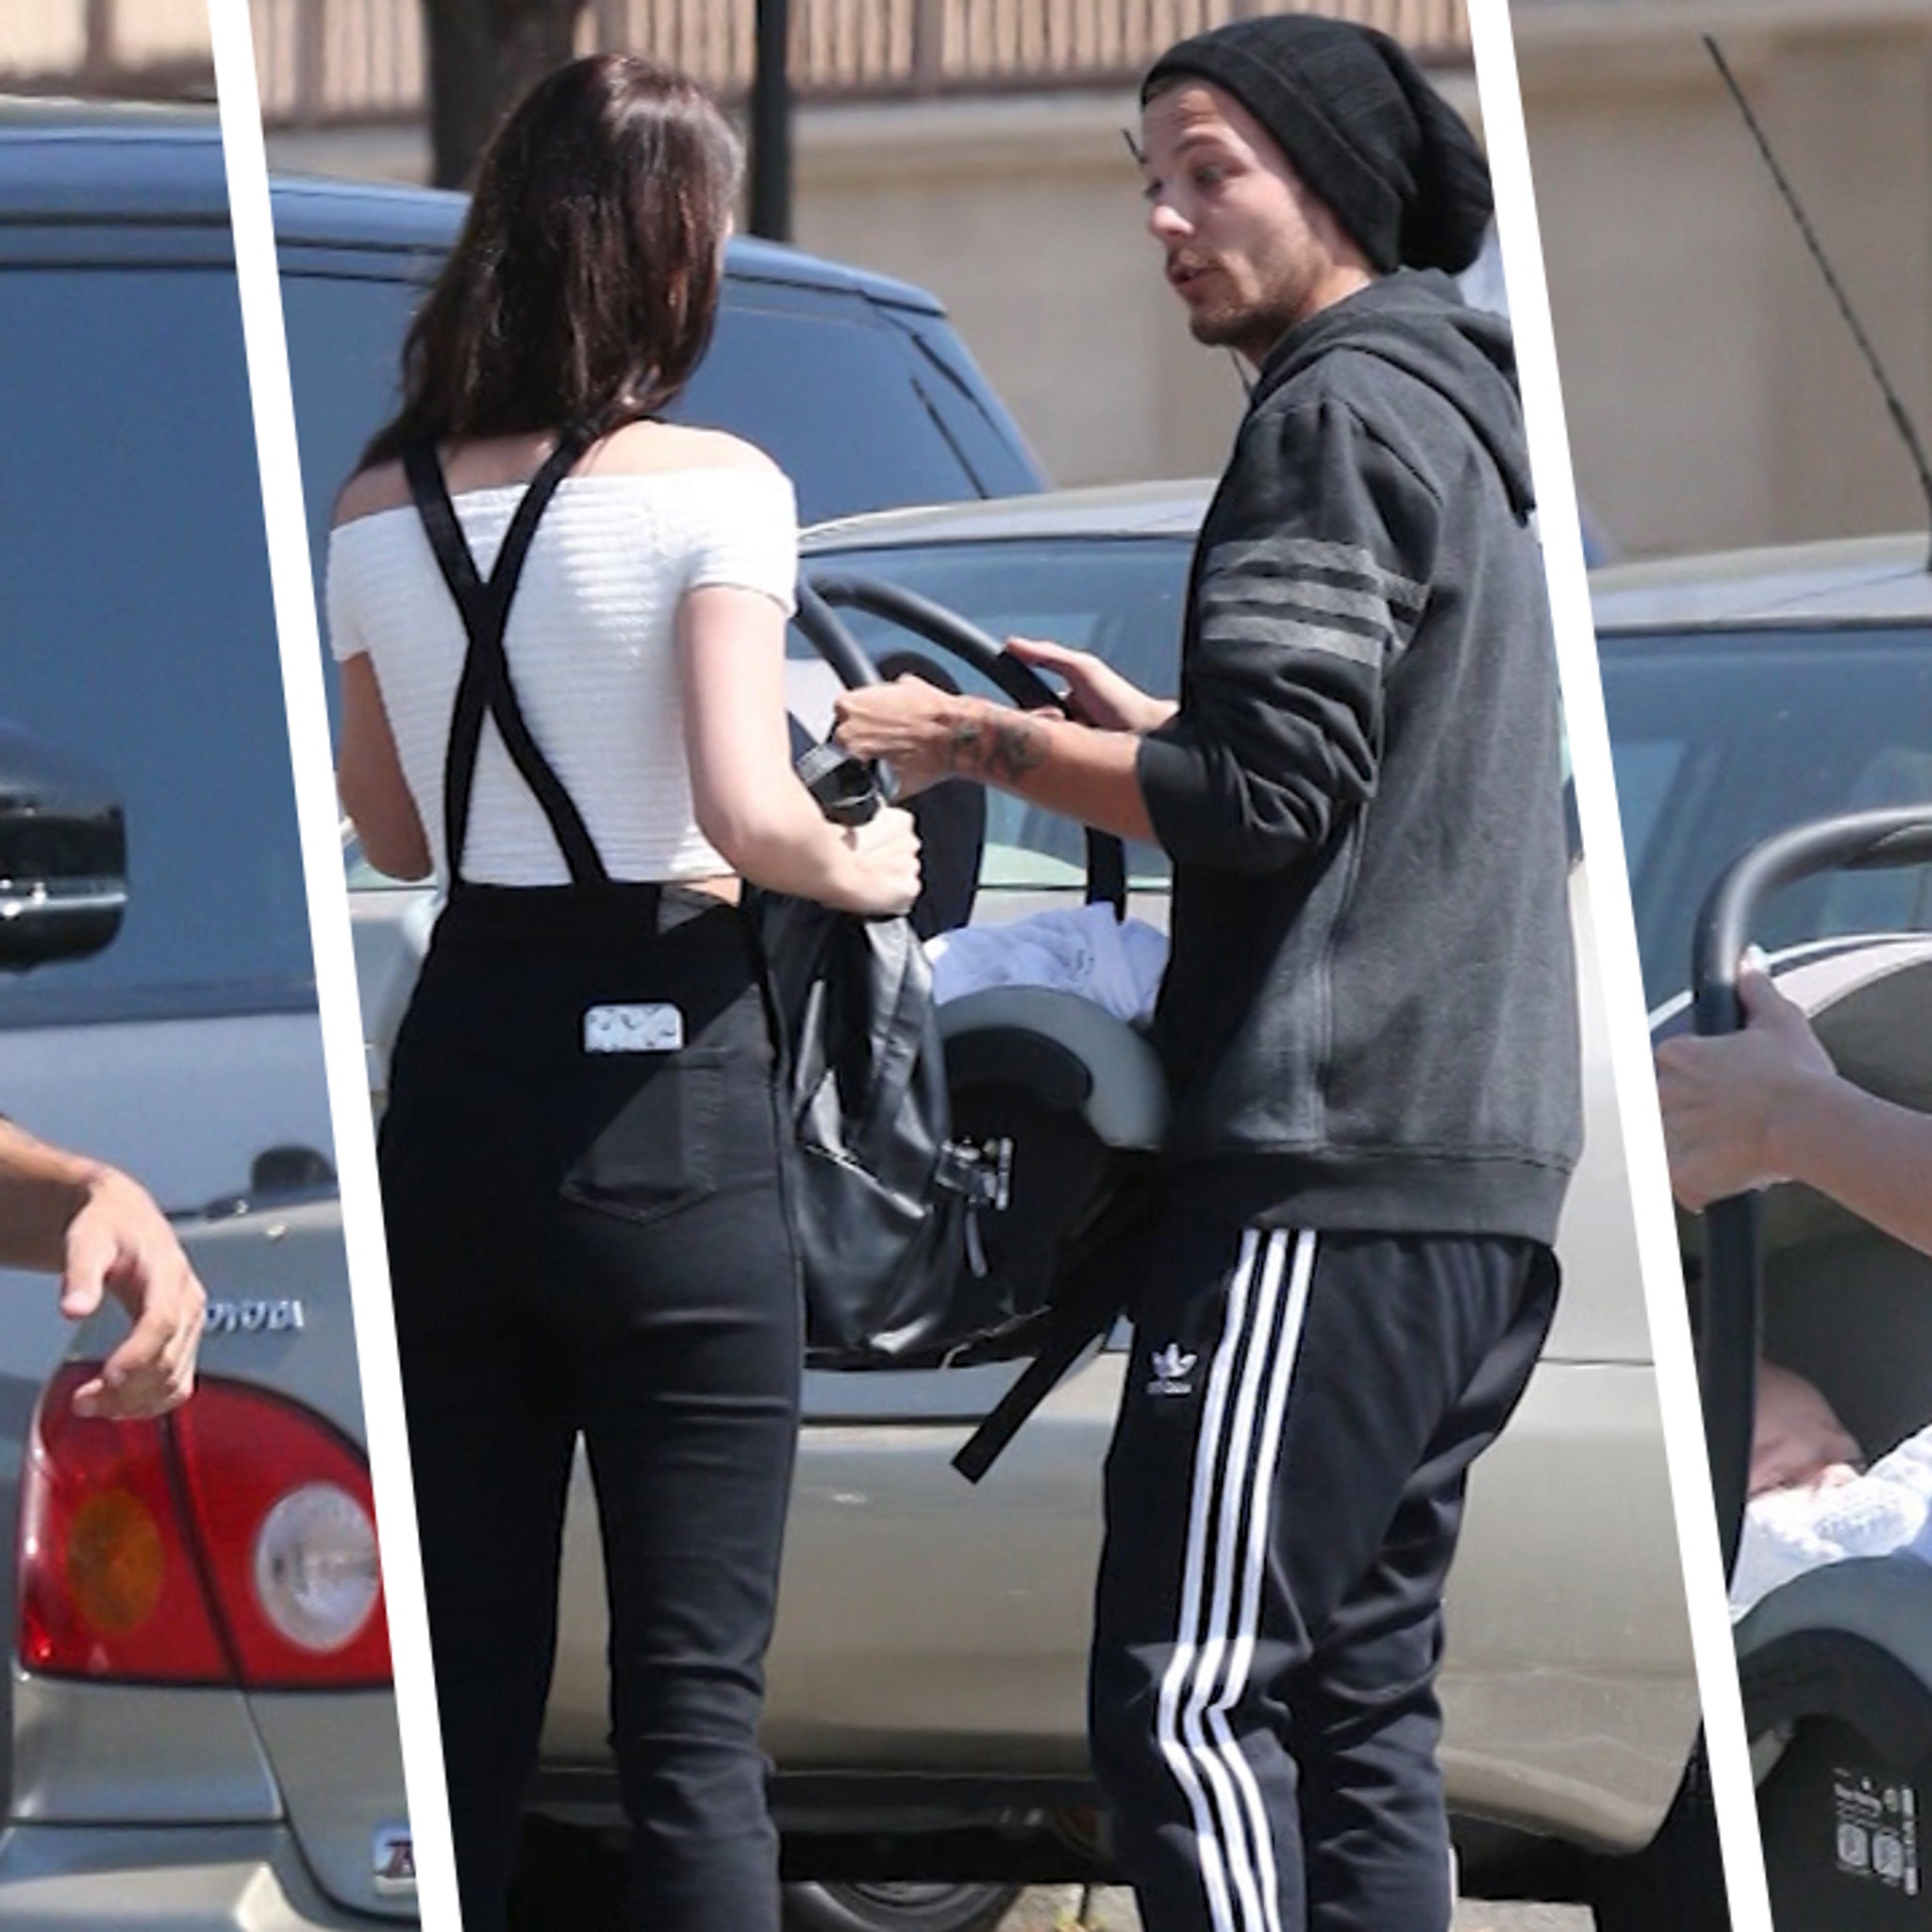 Dad-to-be Louis Tomlinson bags himself multiple lady friends as he